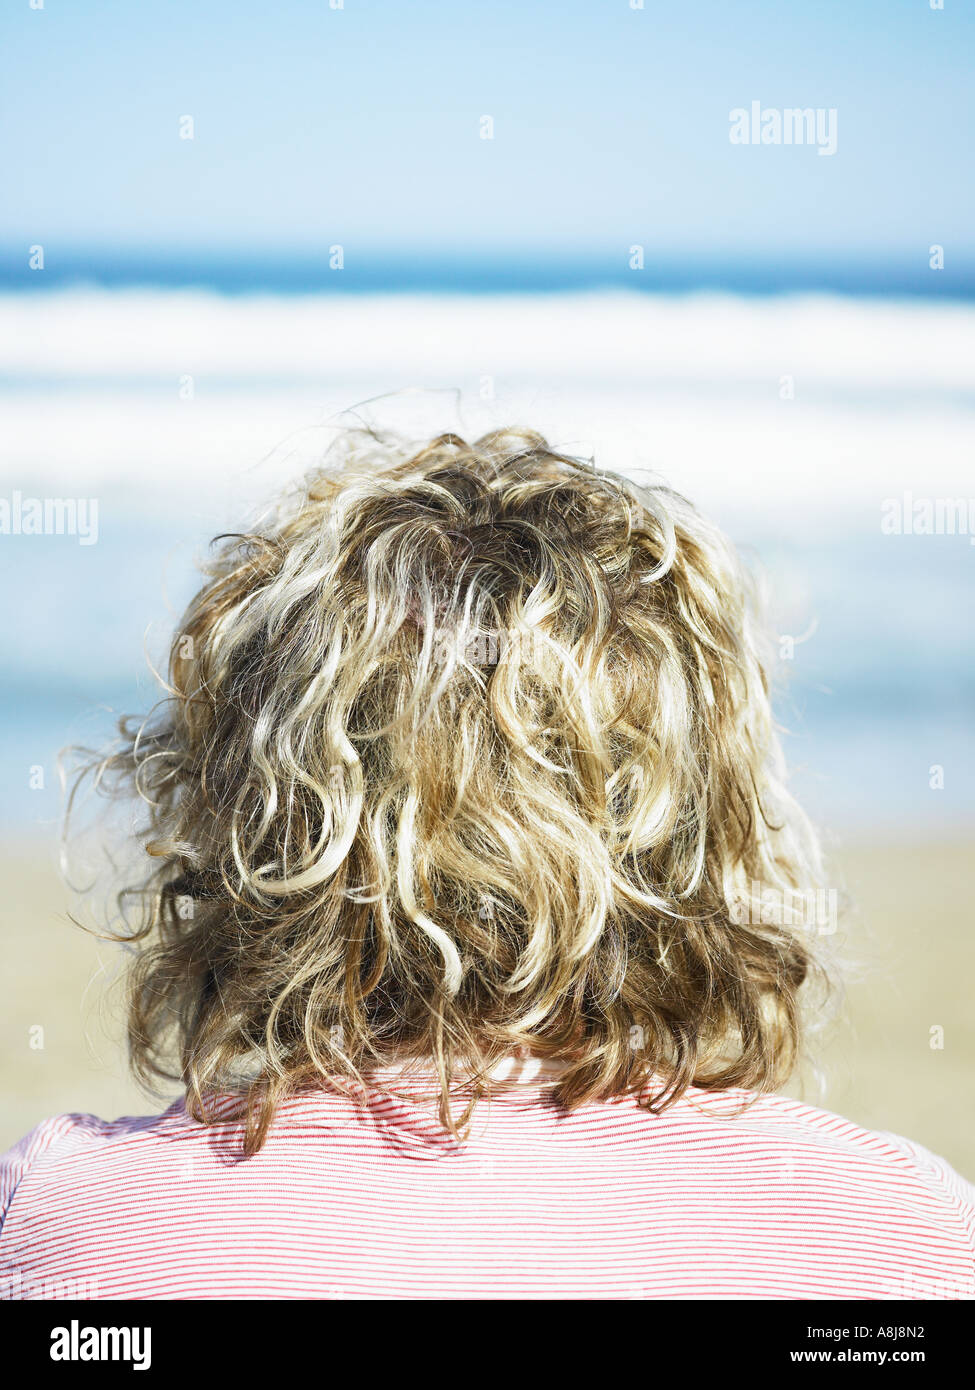 Beach Bum Girl With Bleached Curly Hair Looking Out To The Ocean